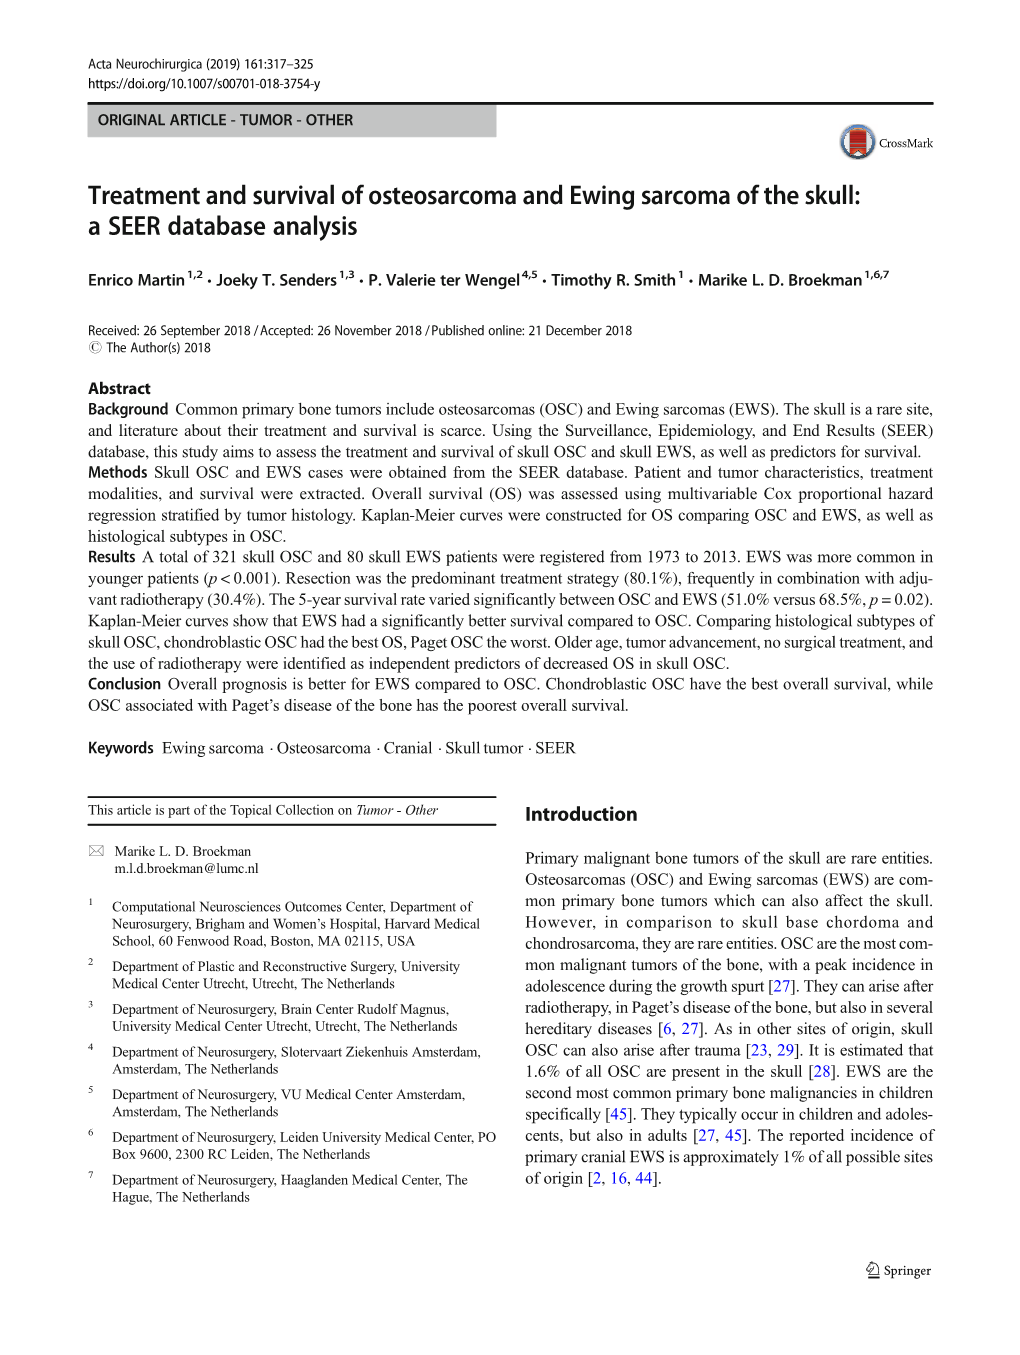 Treatment and Survival of Osteosarcoma and Ewing Sarcoma of the Skull: a SEER Database Analysis